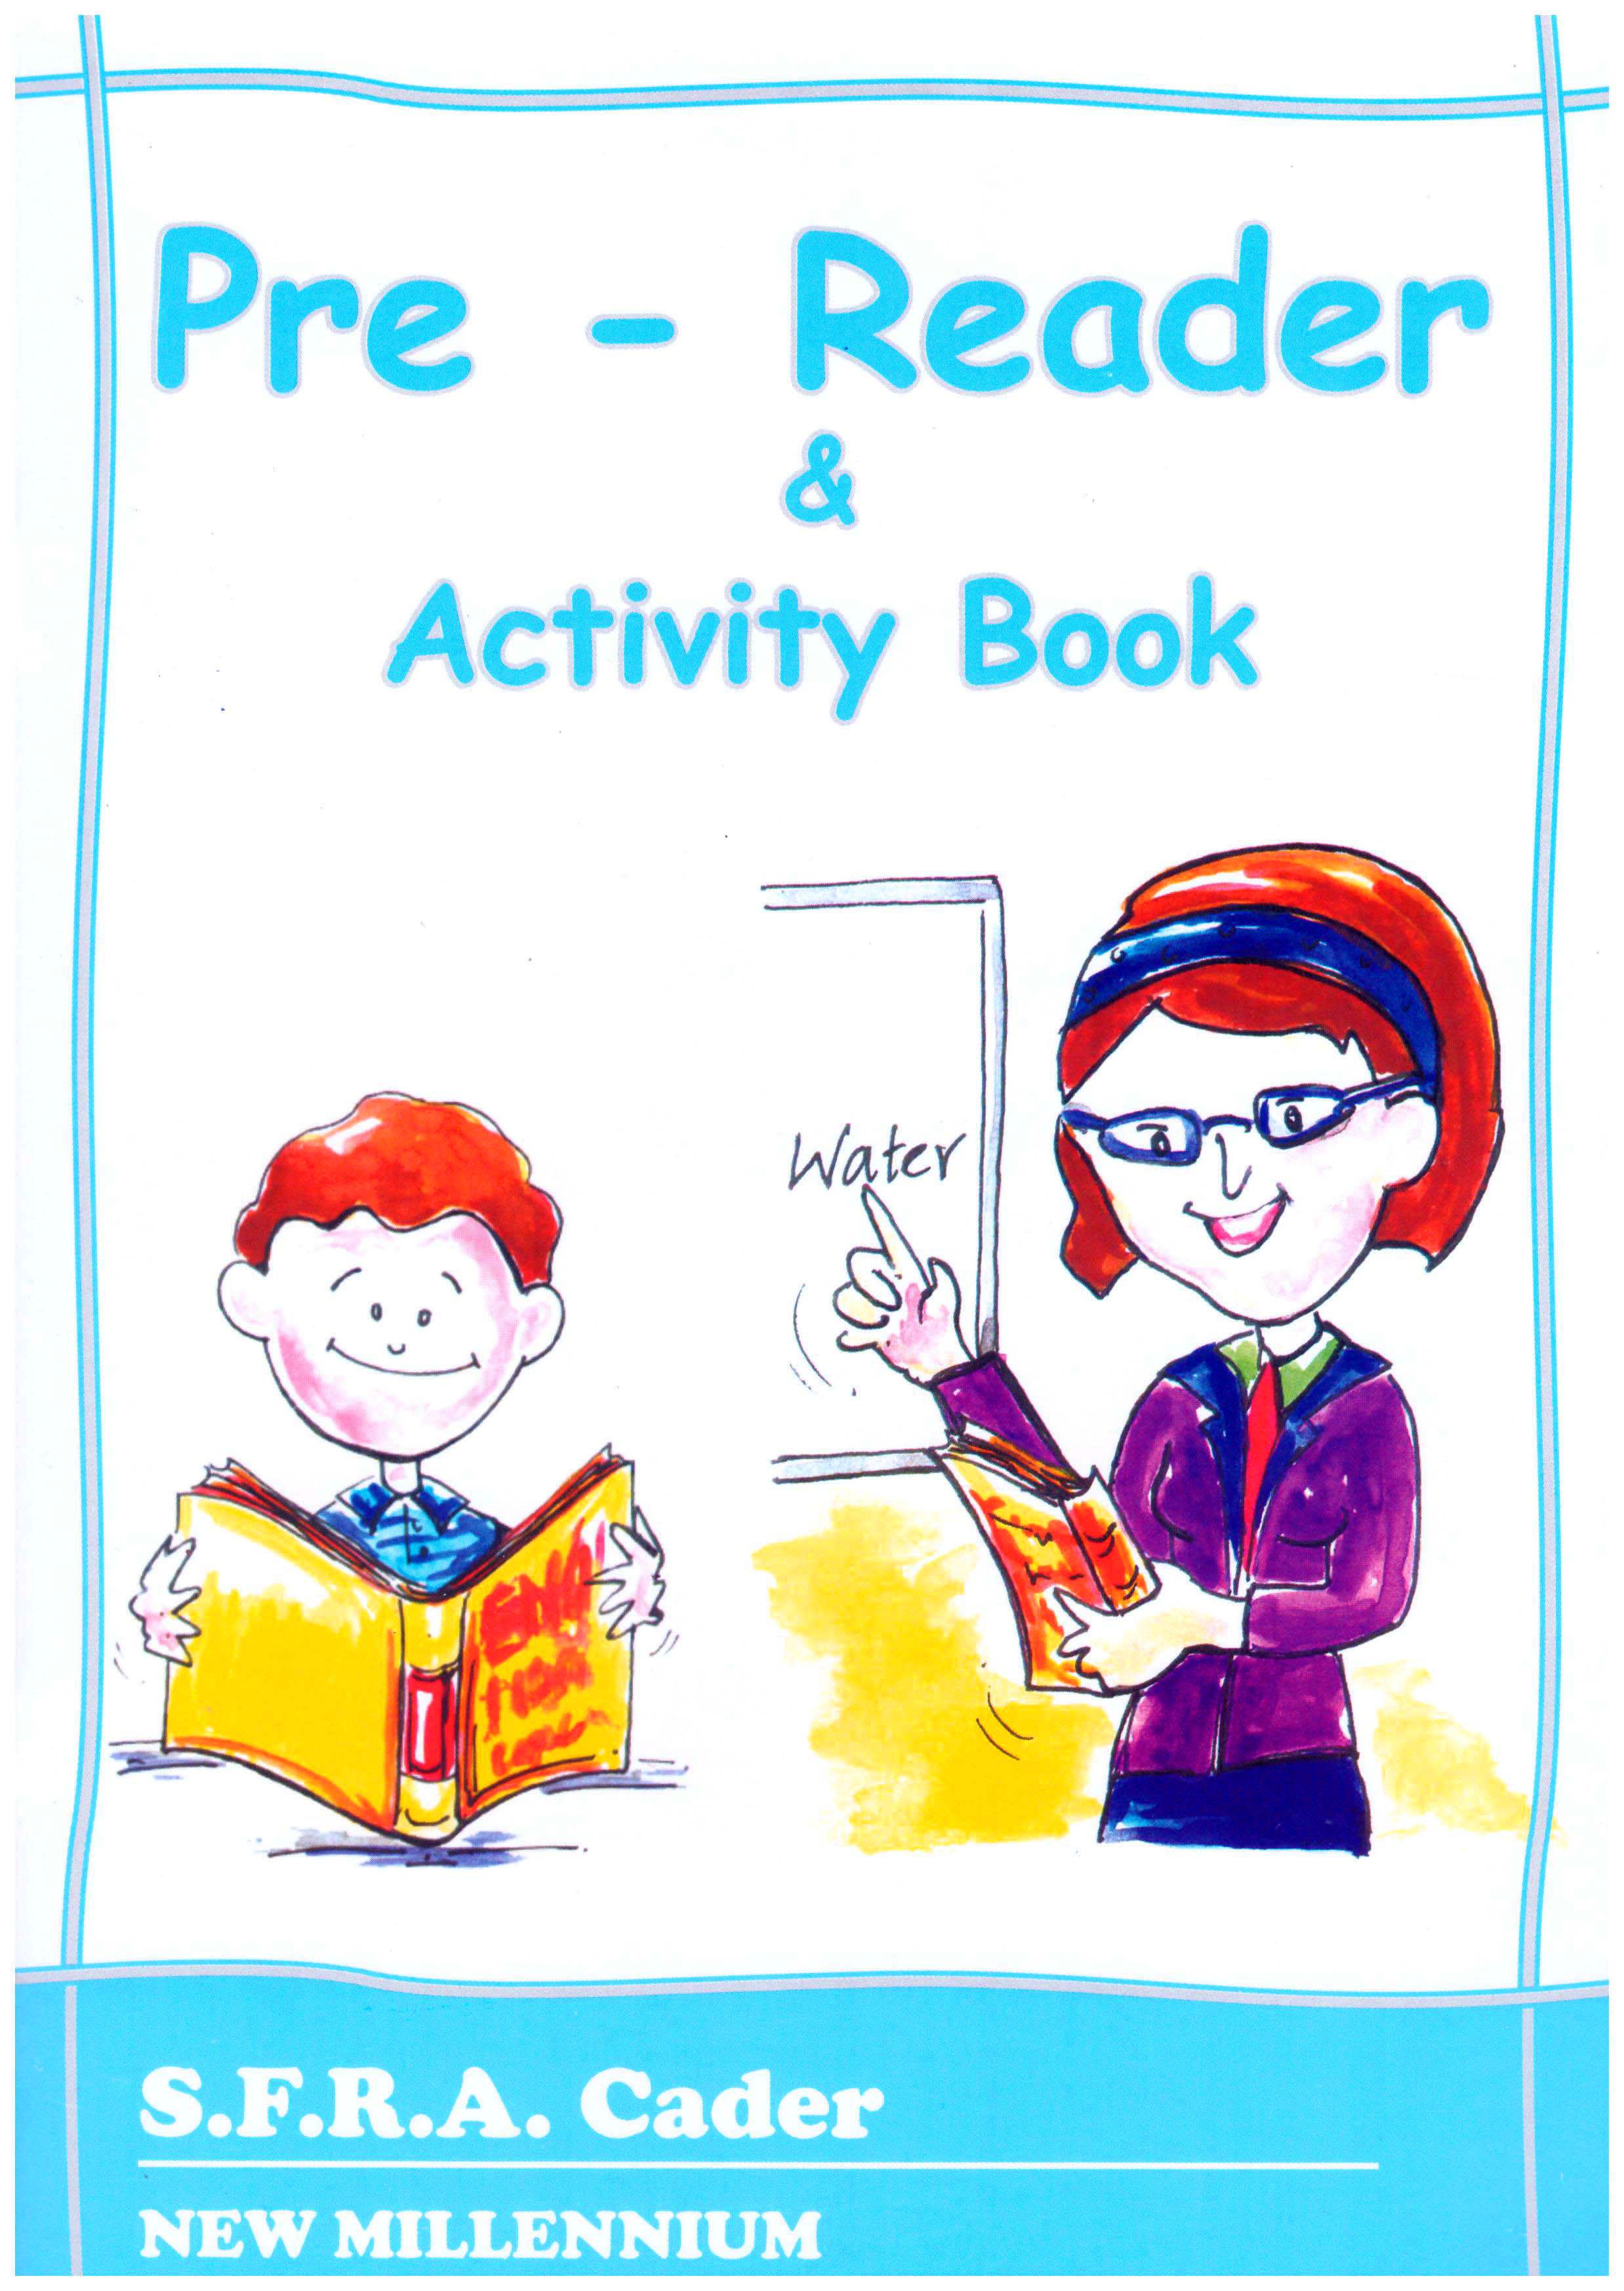 Pre-Reader and Activity Book